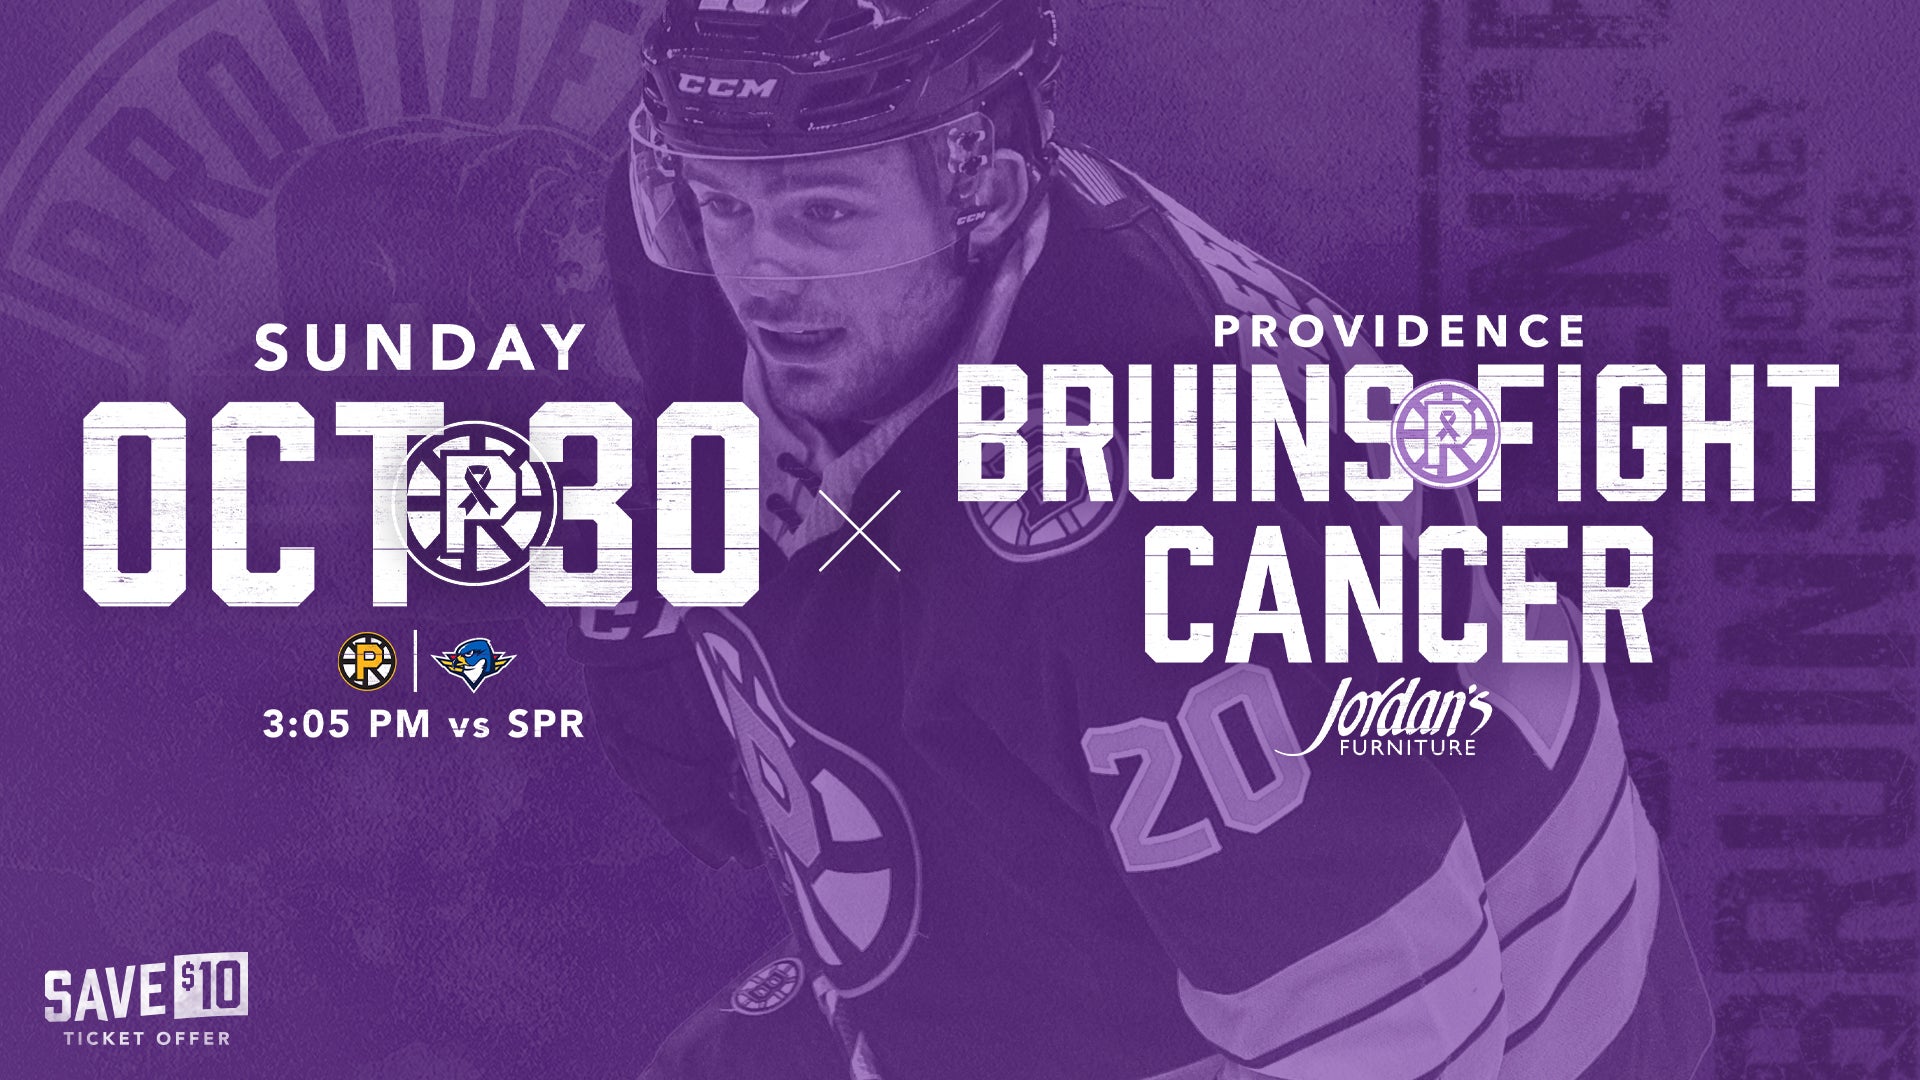 Bruins to Host Hockey Fights Cancer Night